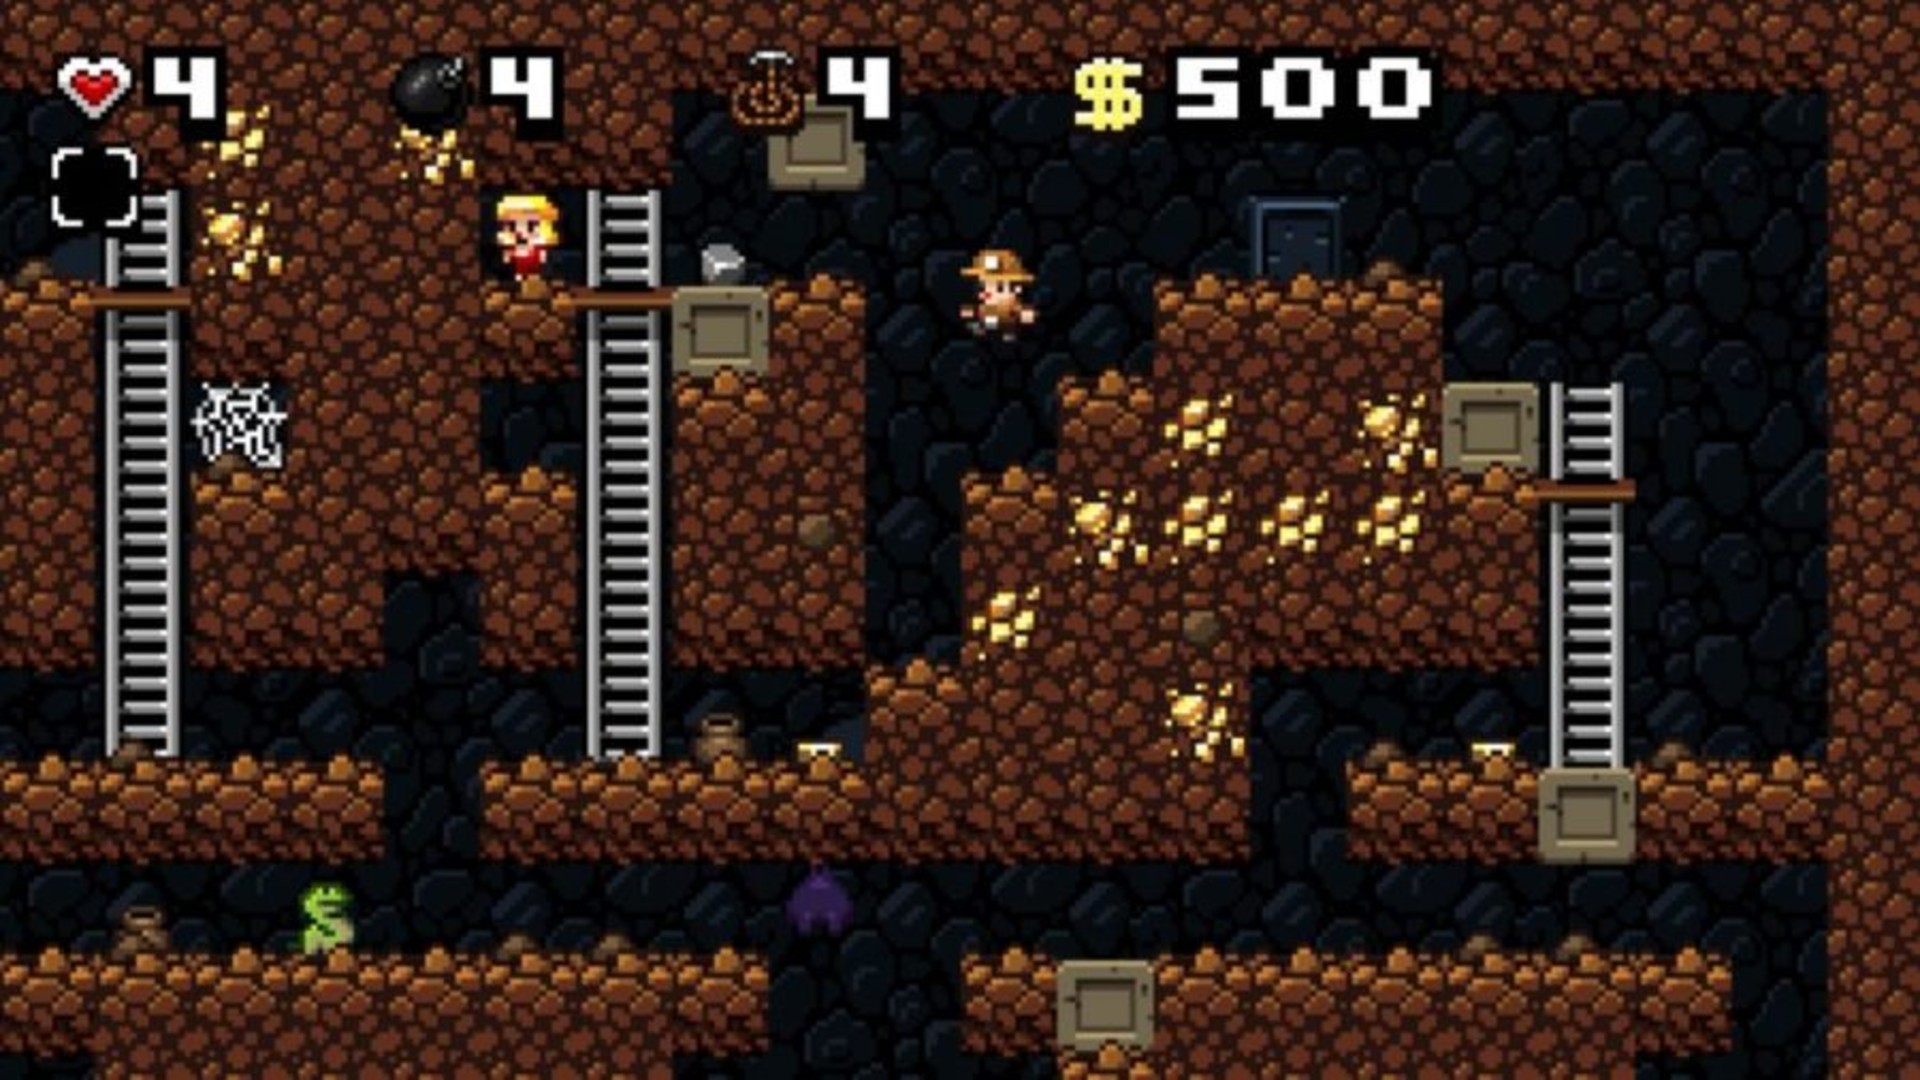 Best free PC games: Spelunky Classic. Image shows the pixelated caves into which you delve in the game.